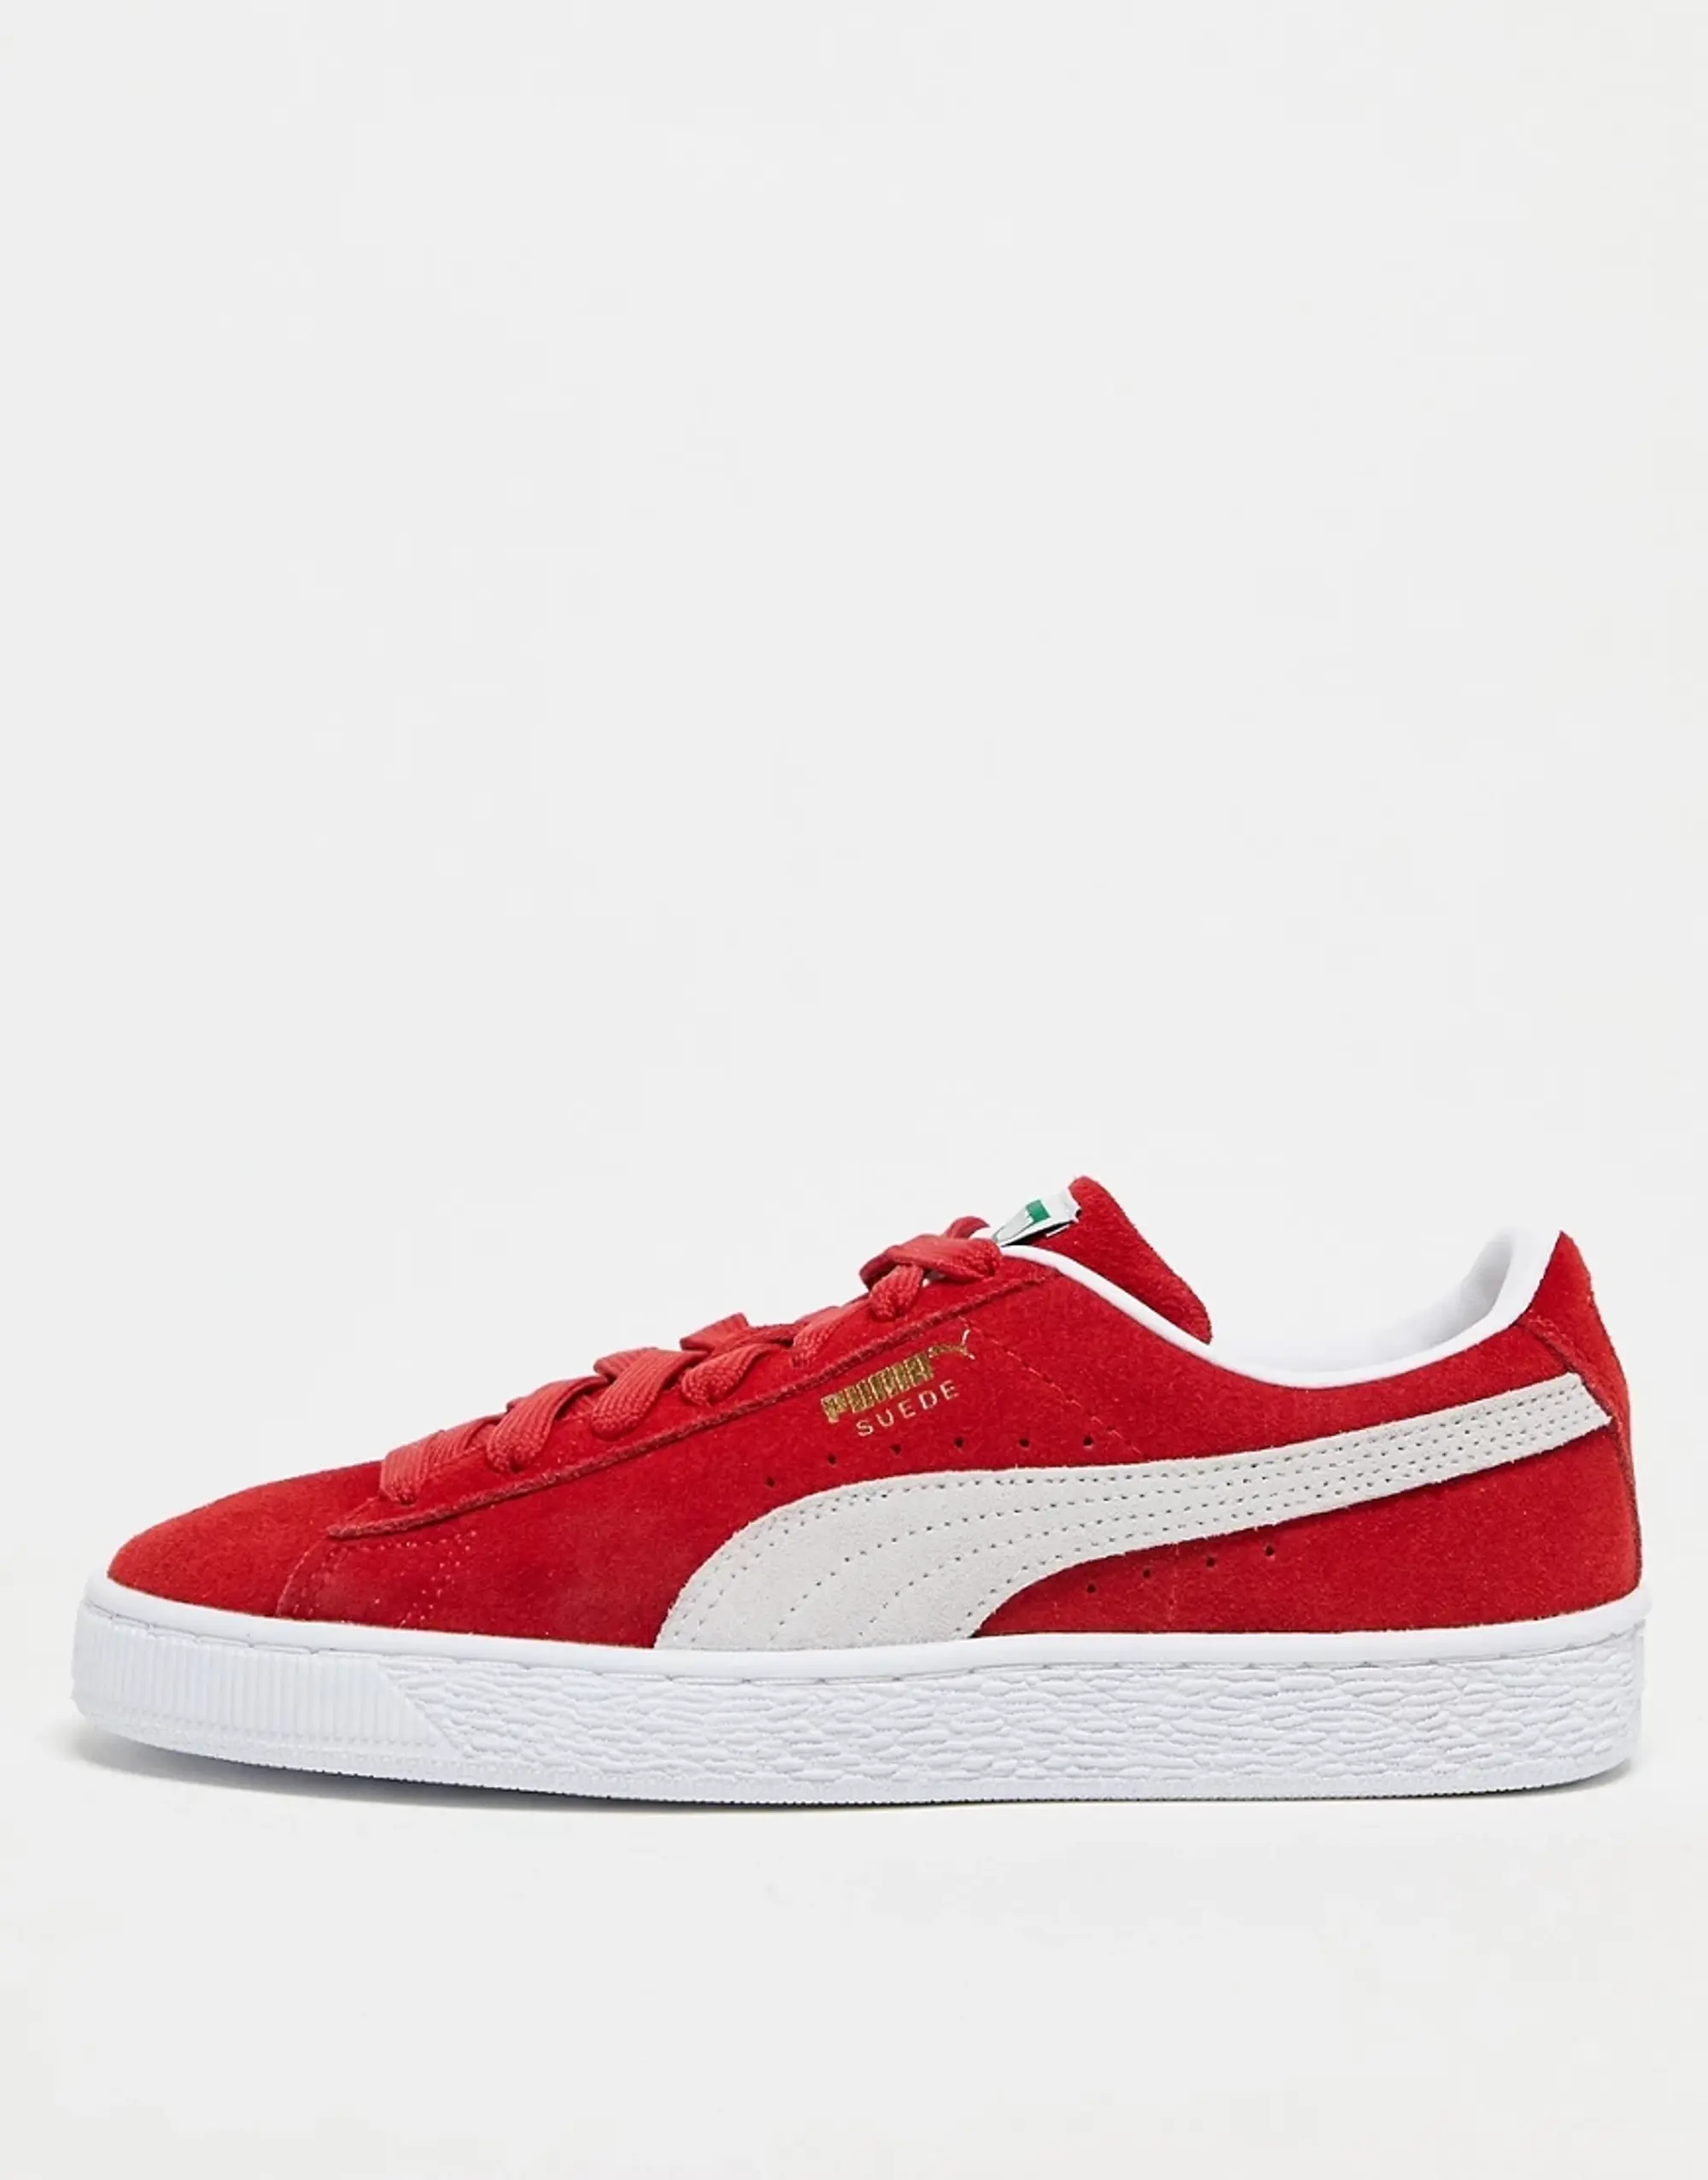 Puma Suede Classic Xxi Trainers In Red And White